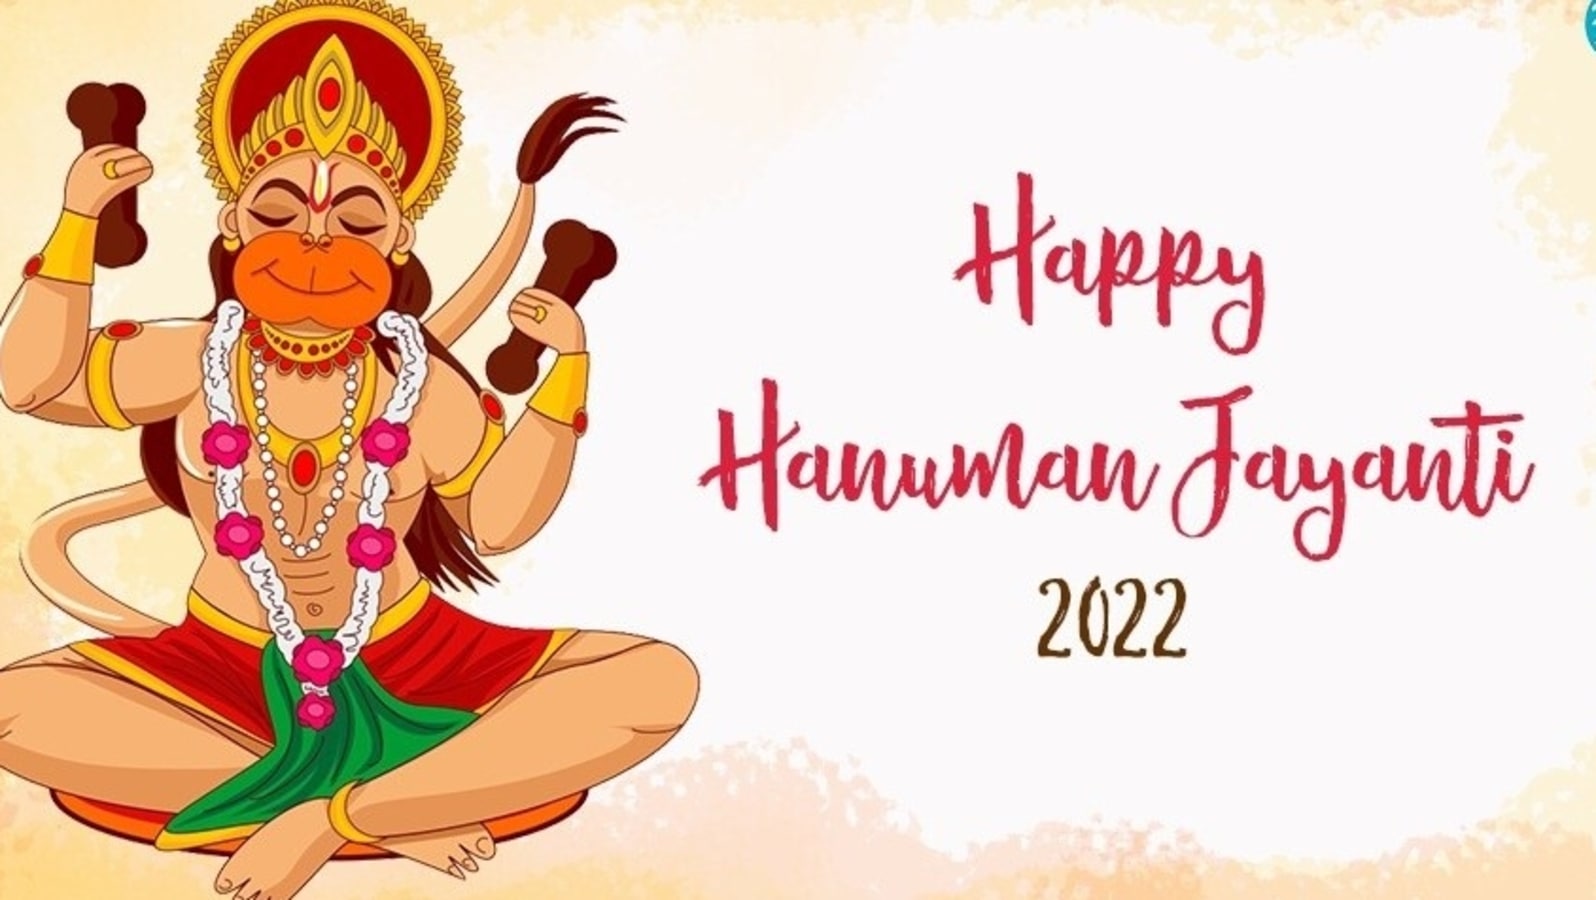 Download the Best Collection of Hanuman Images in Full 4K+: 999+ Incredible Hanuman  Images to Download